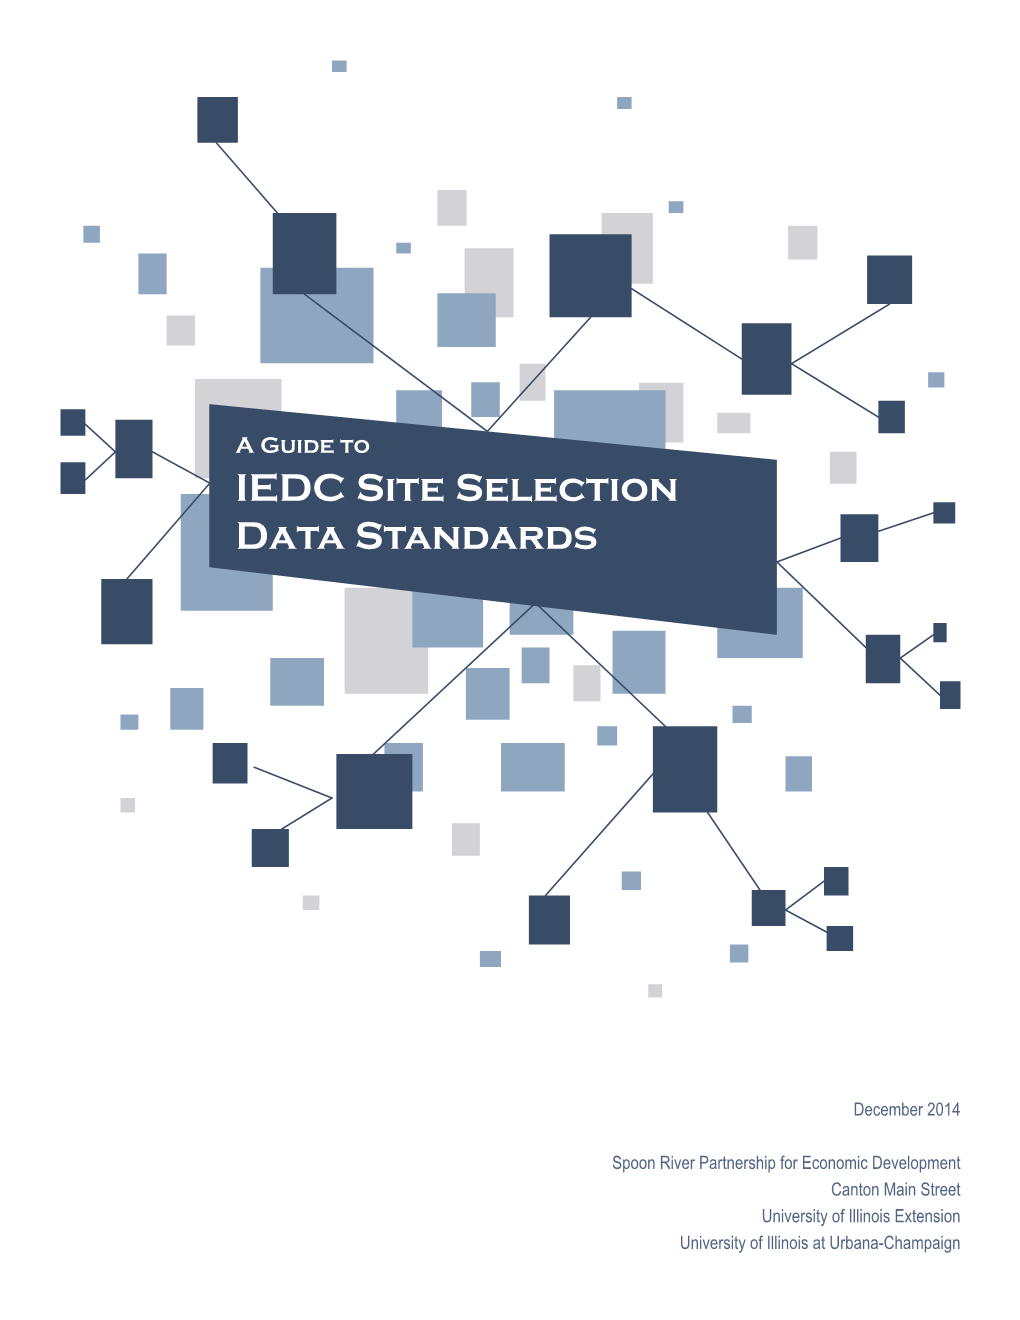 IEDC Site Selection Data Standards